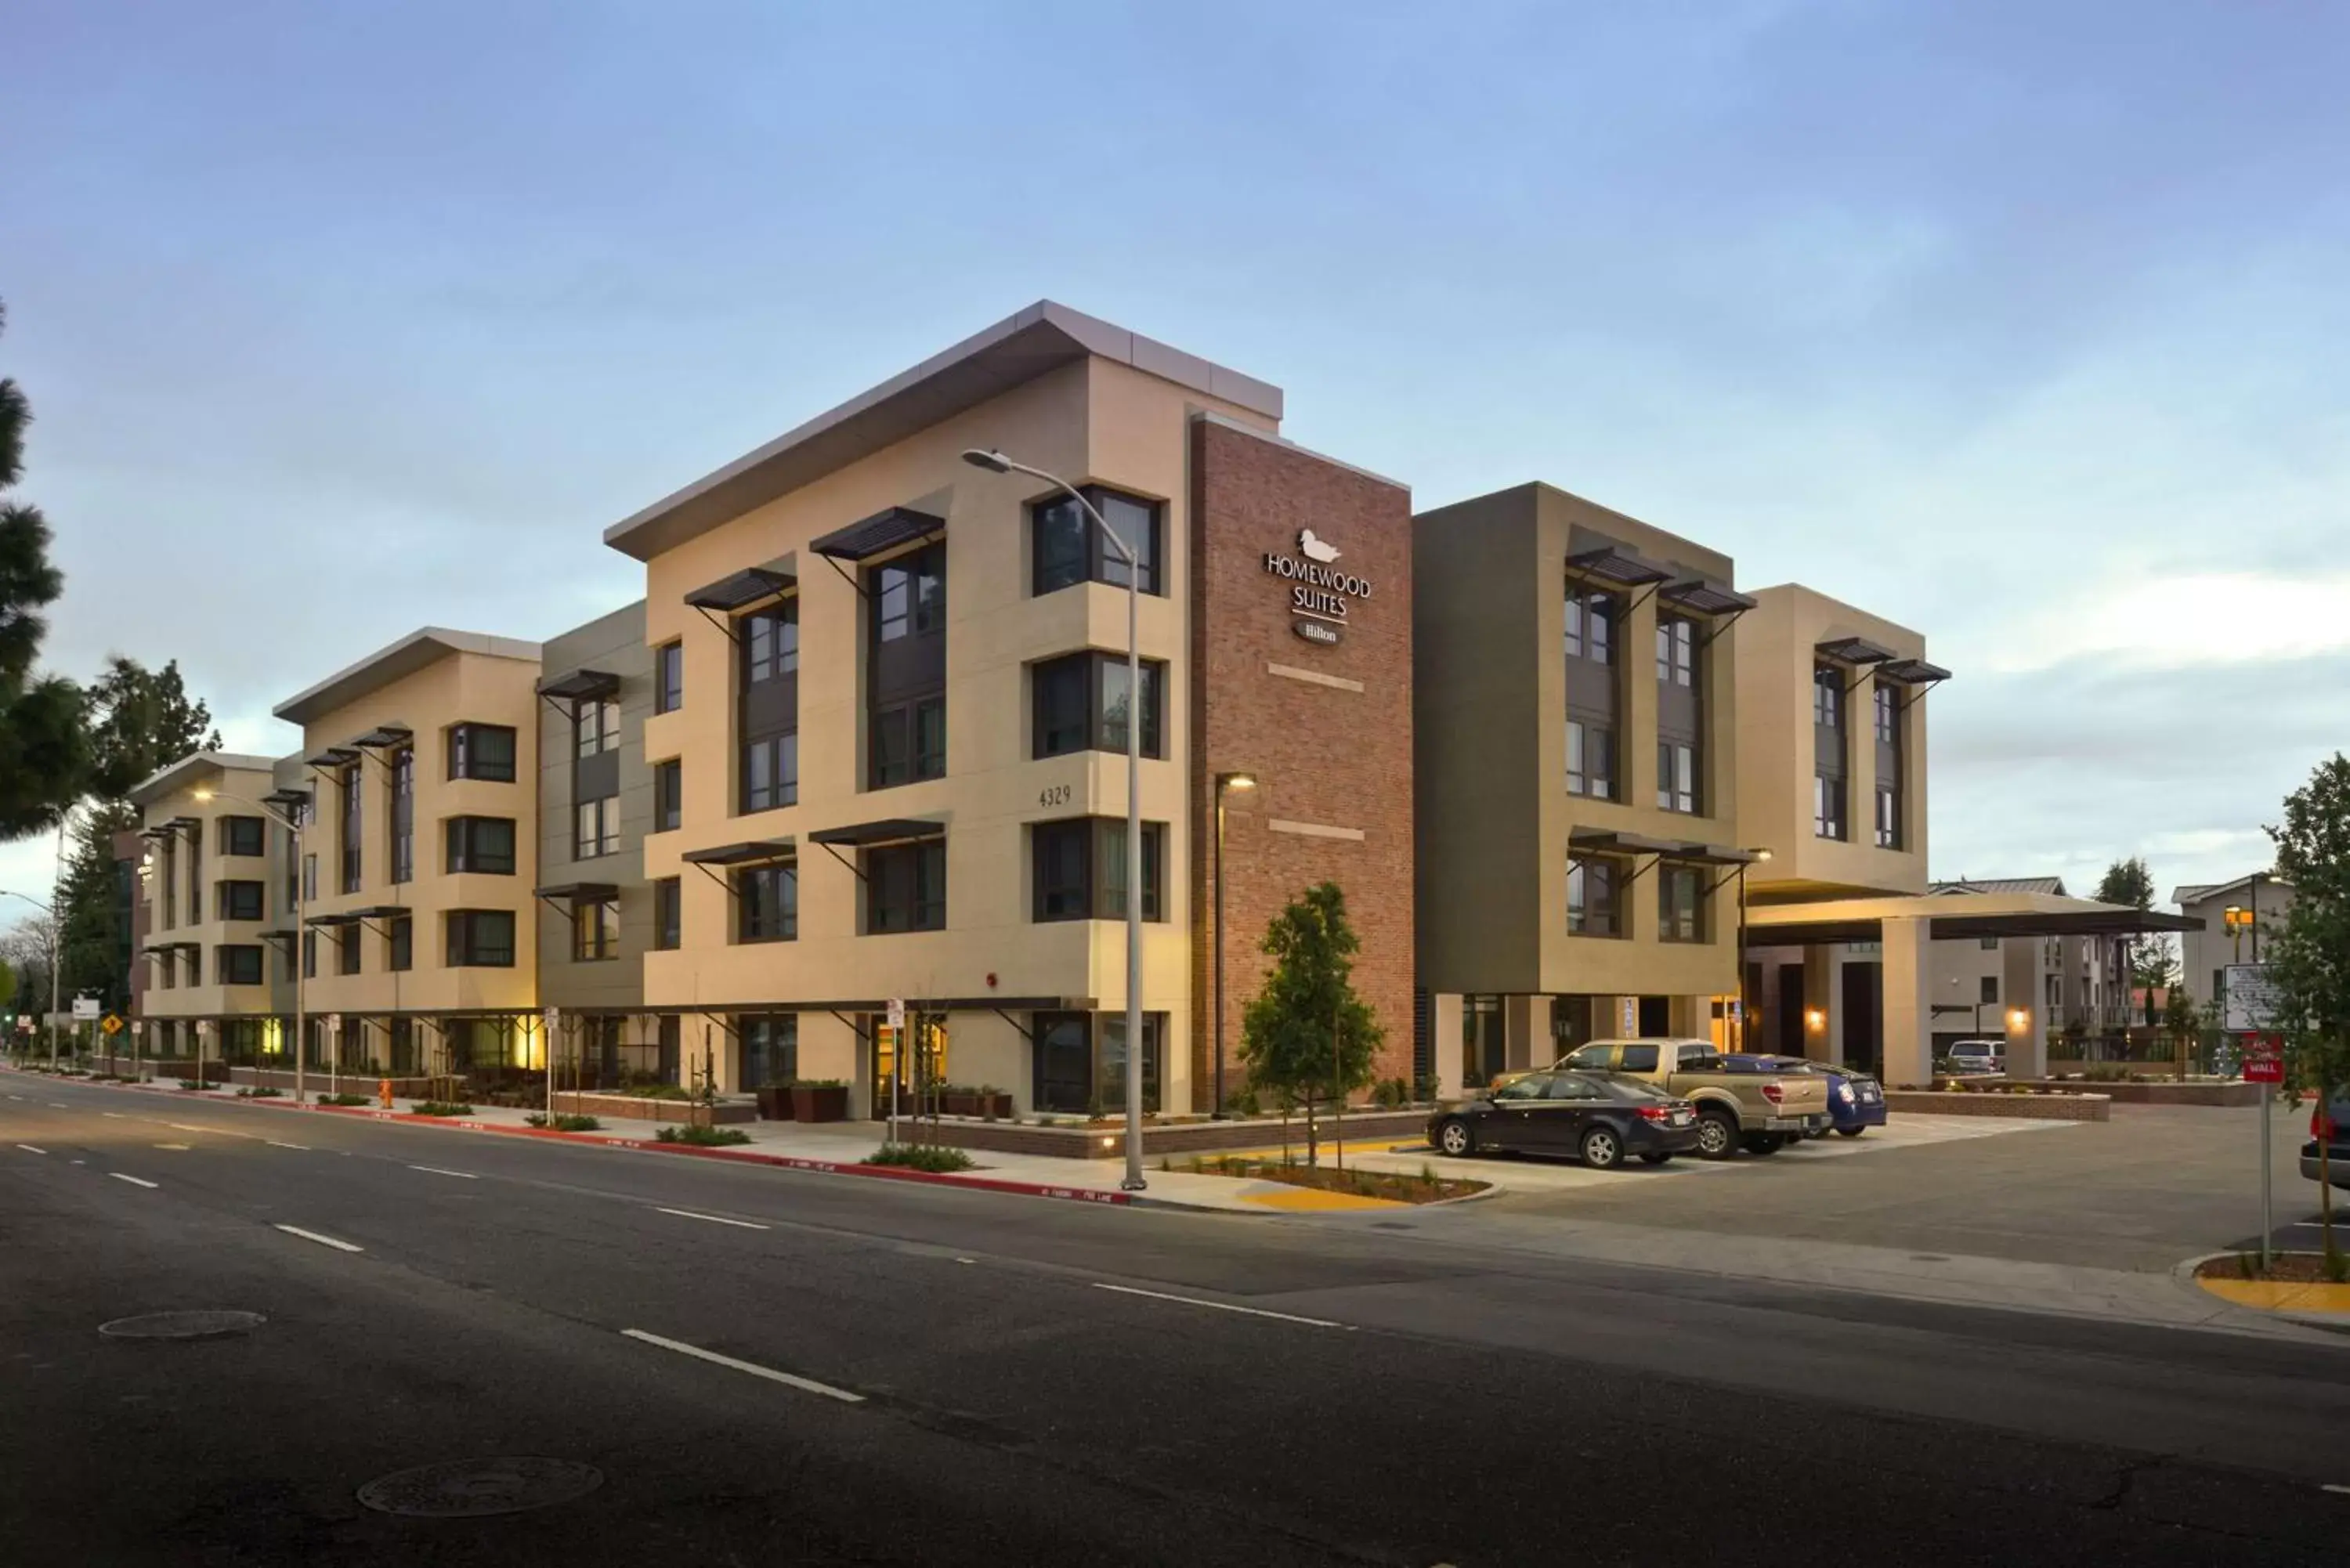 Property Building in Homewood Suites by Hilton Palo Alto